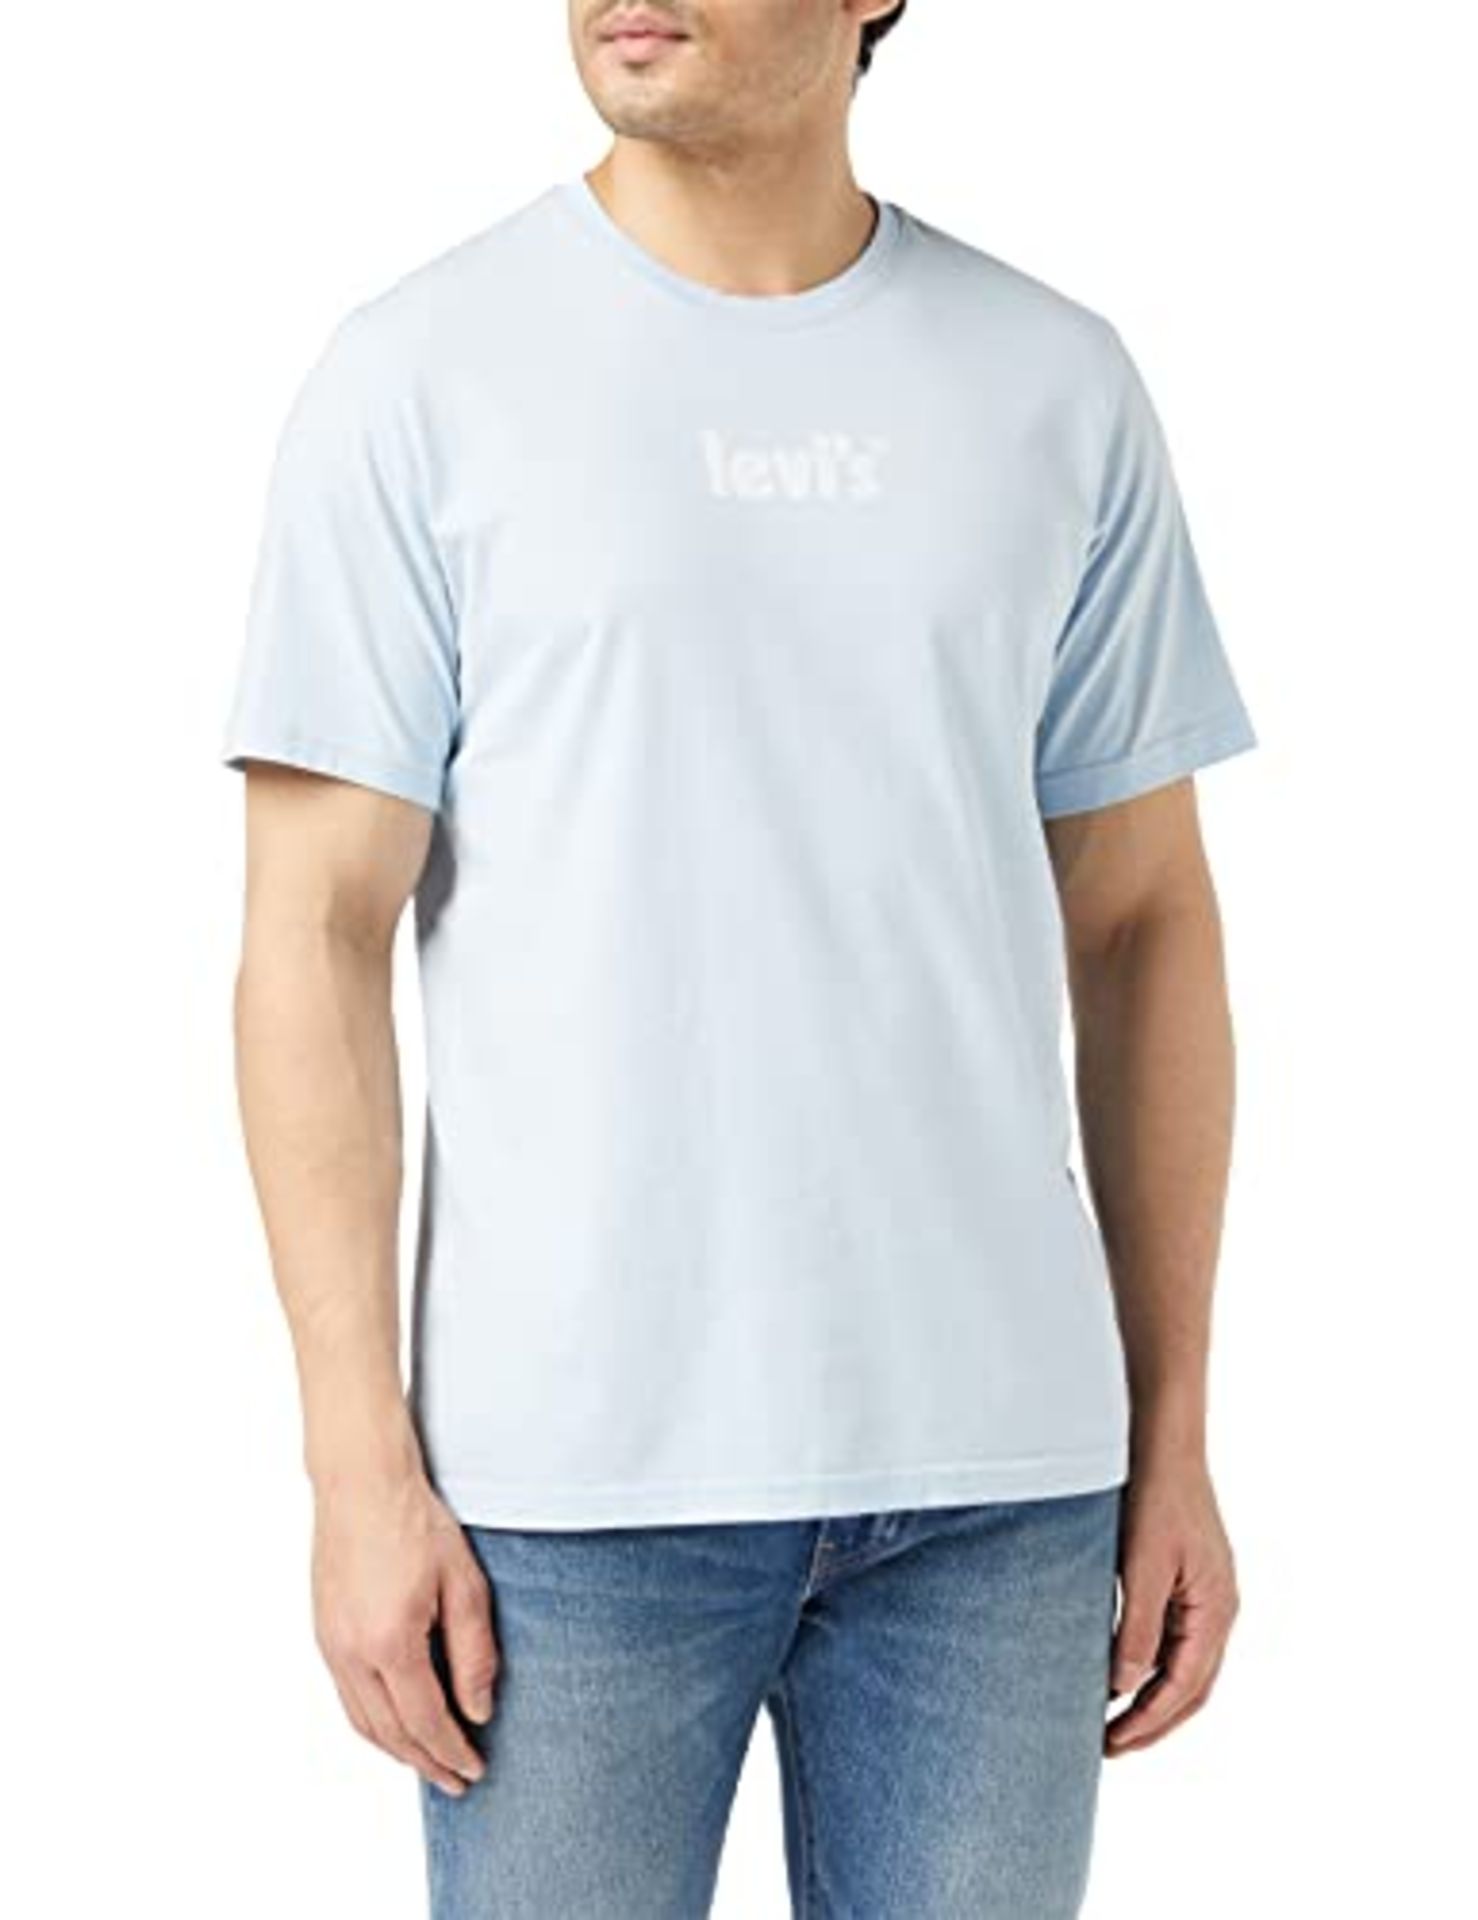 Levi's Ss Relaxed Fit Tee, Men's T-shirt, Skyway, L